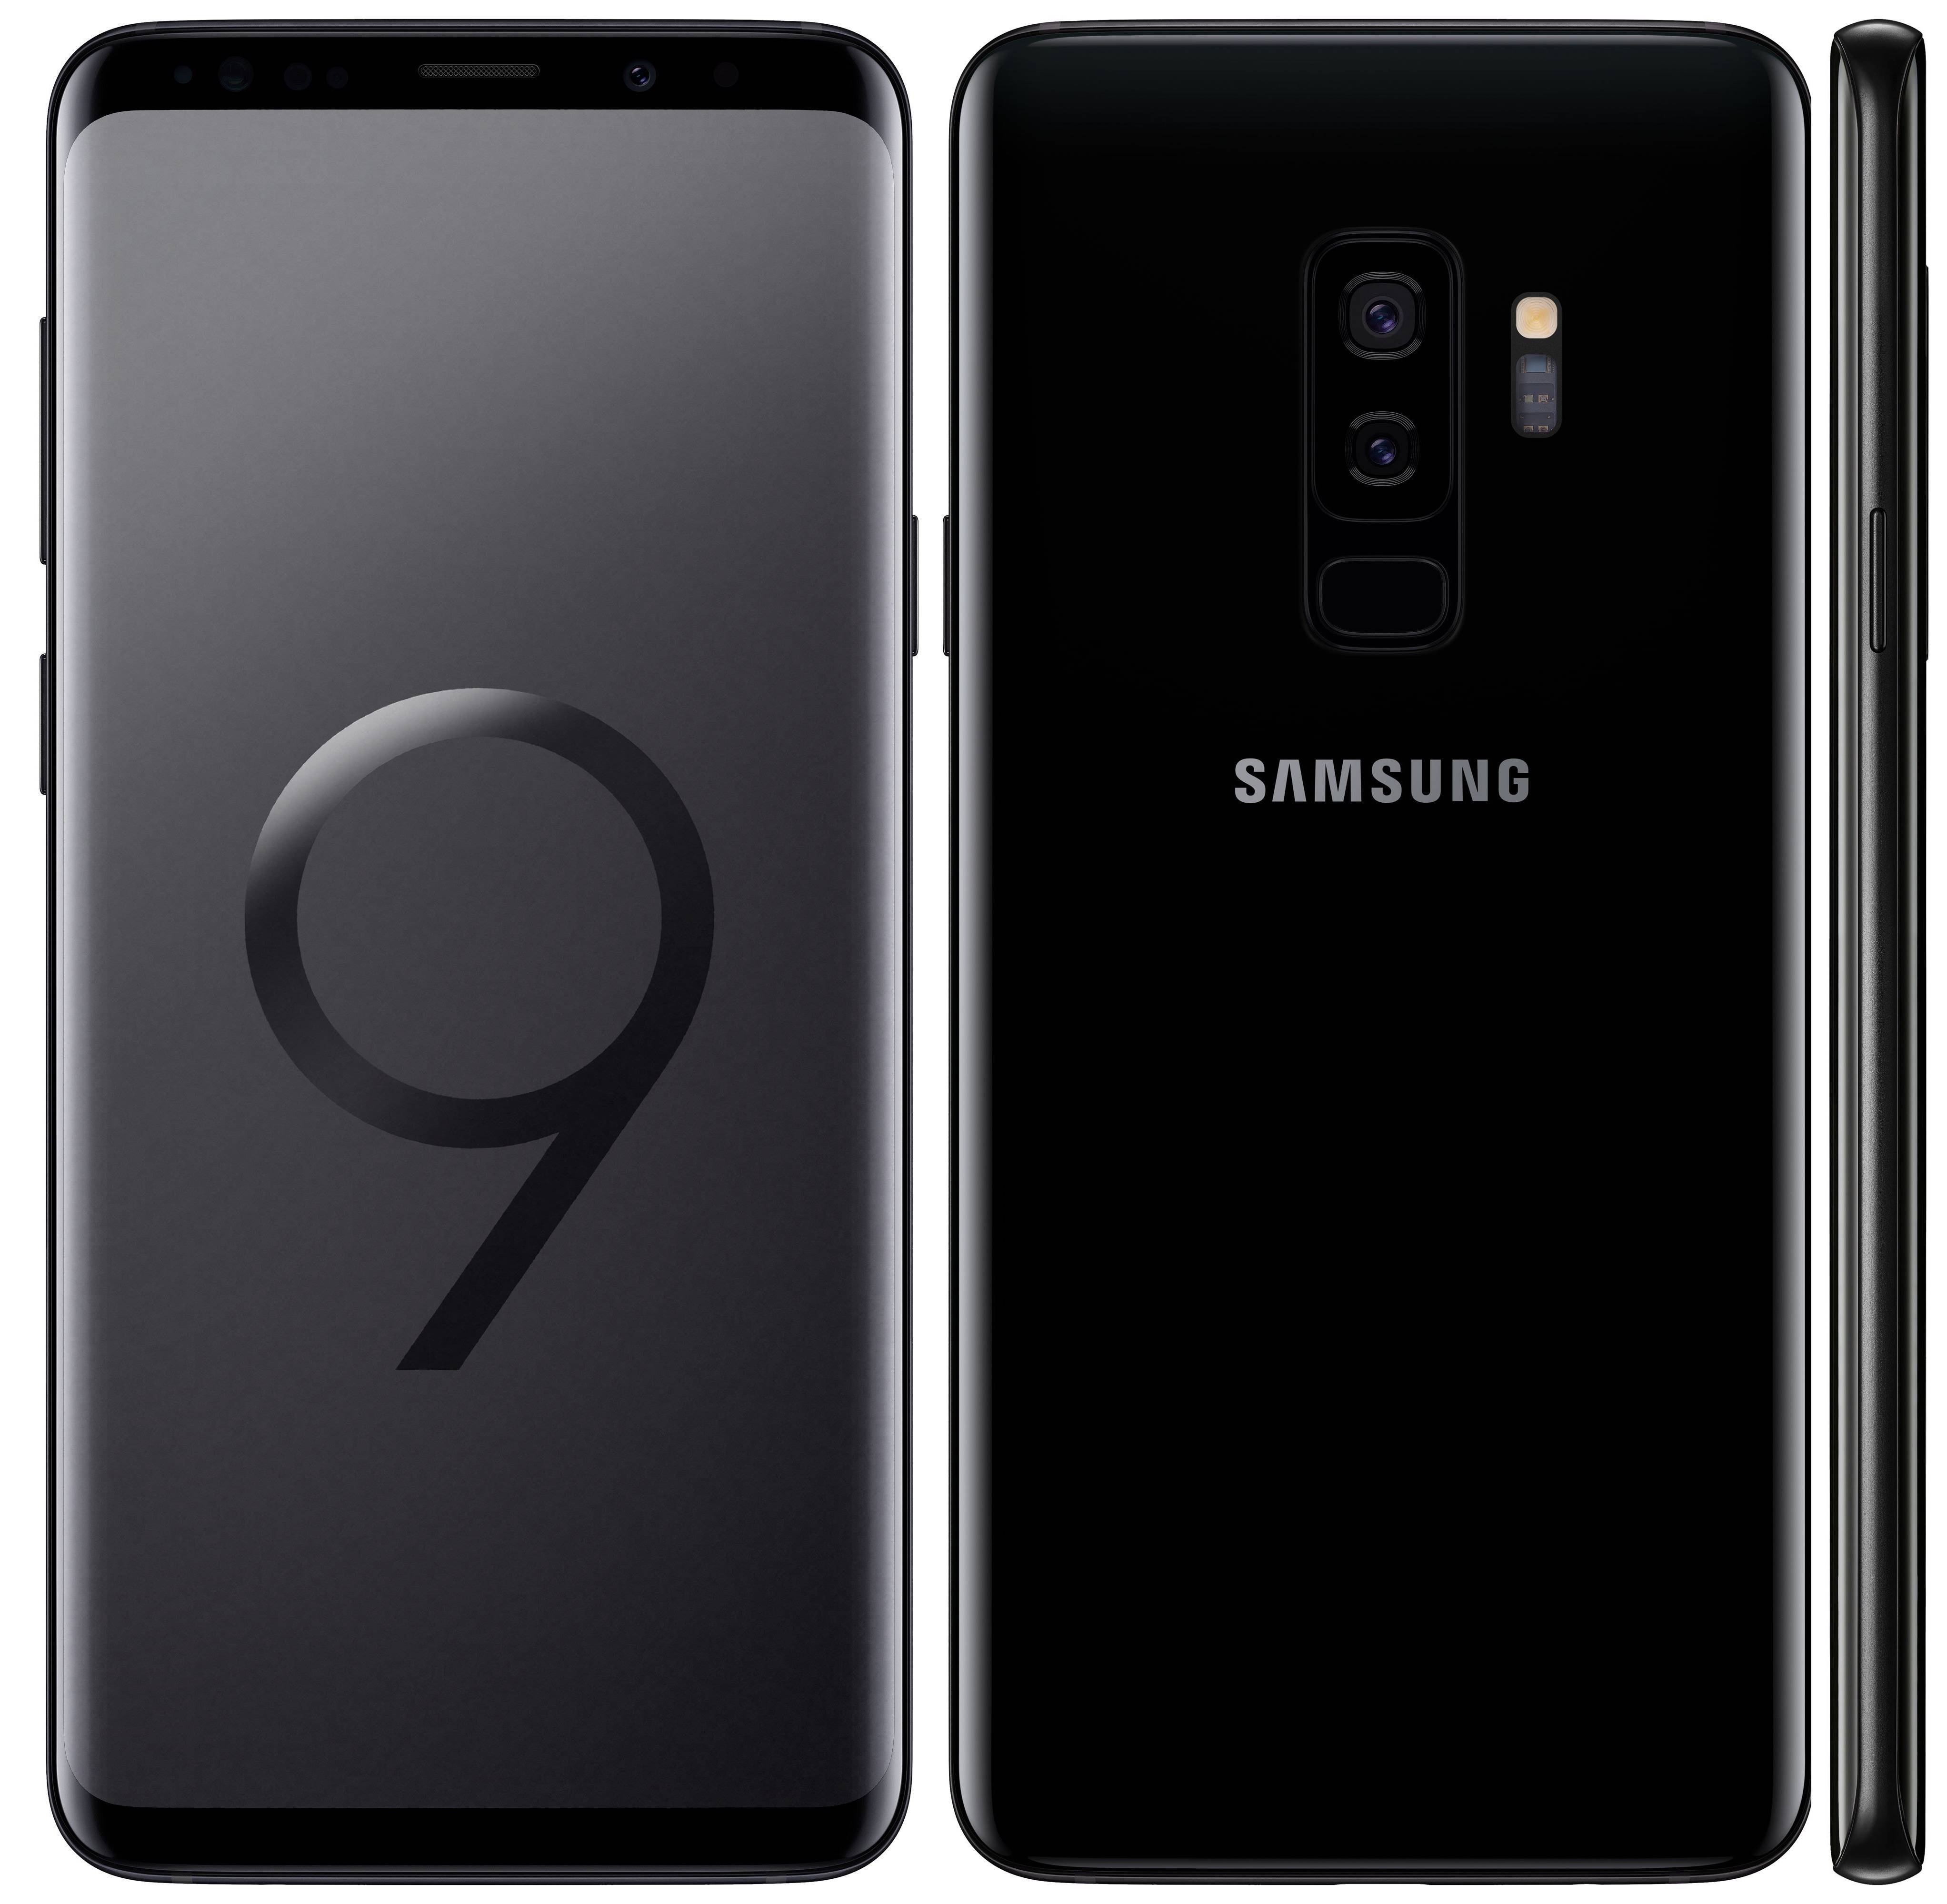 Samsung Galaxy S9 high resolution images 4